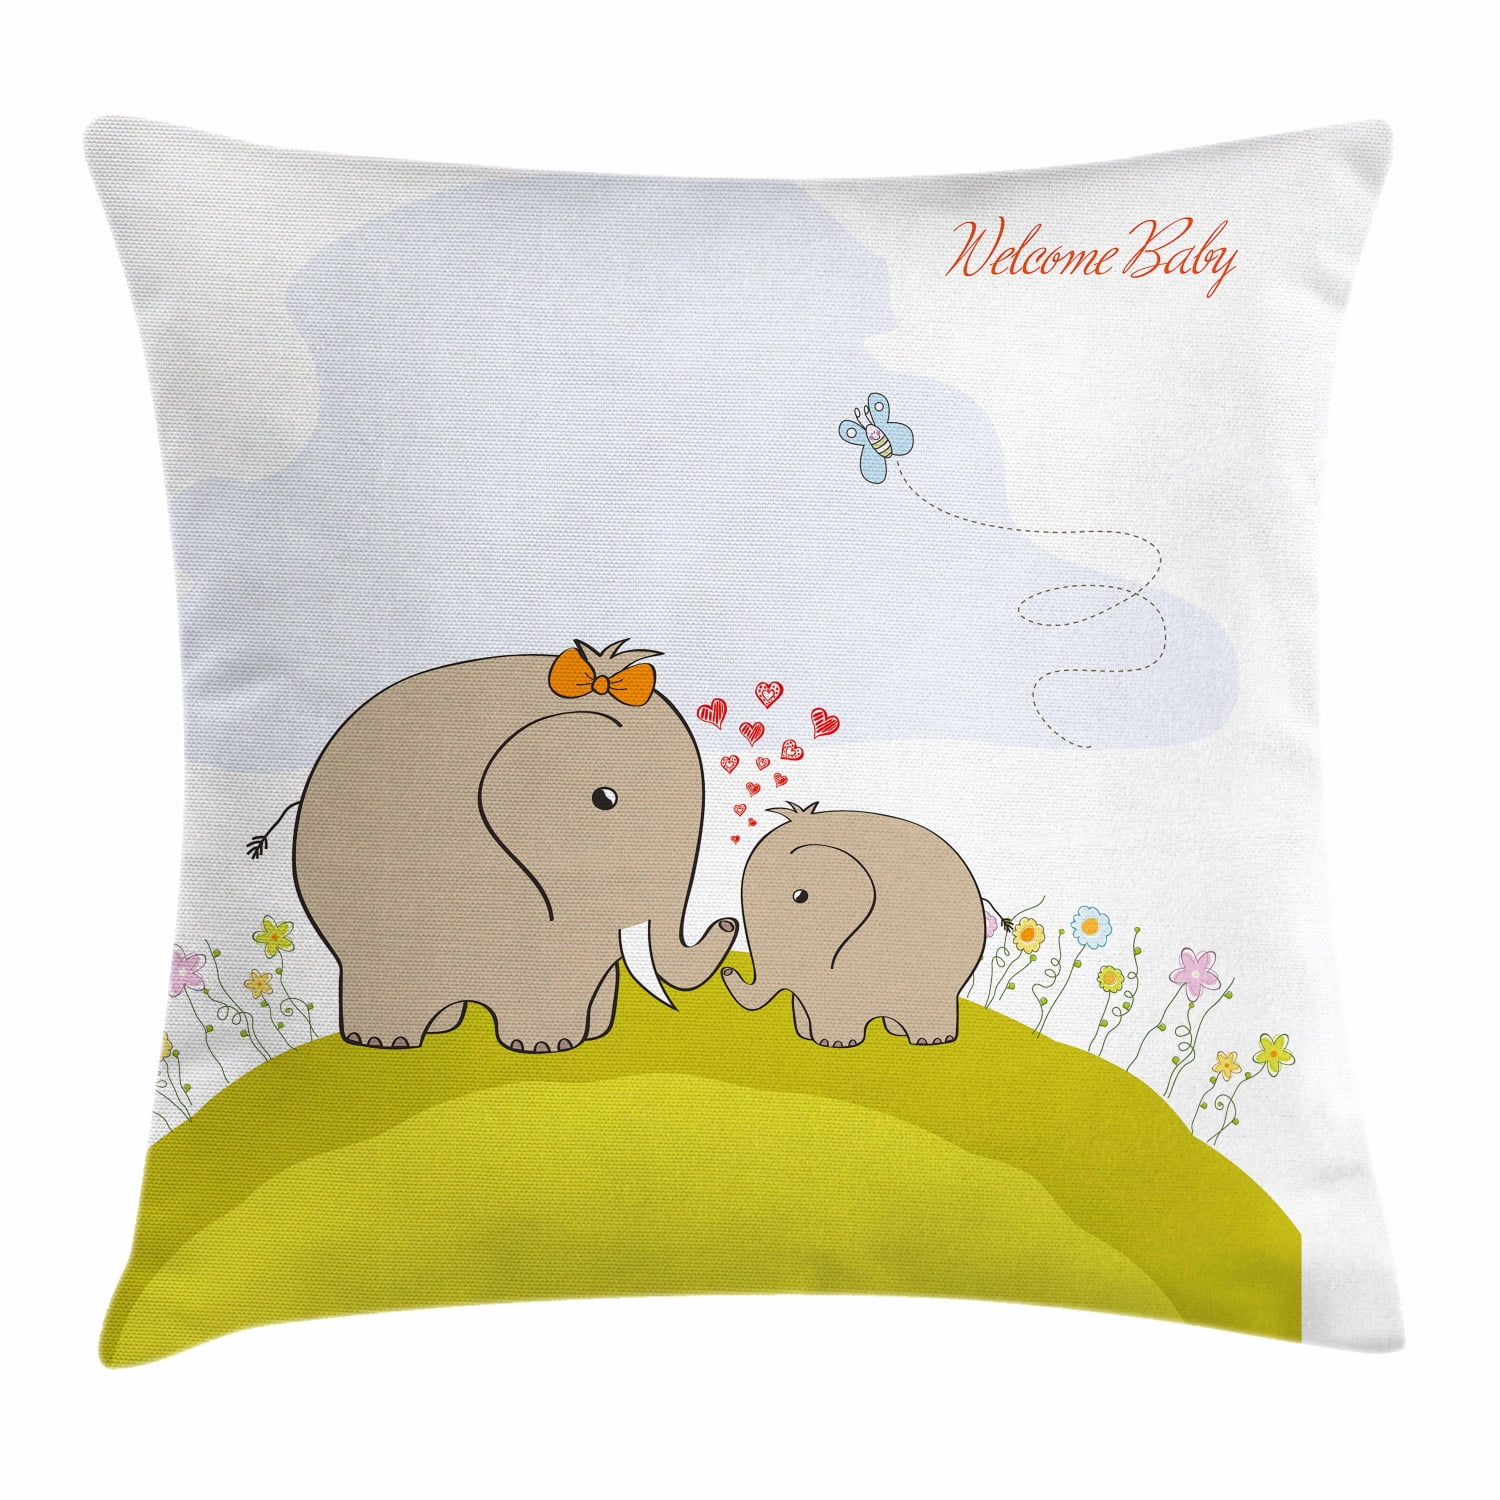 Lovely Multi Elephant Pattern Pillow Covers Decorative for Girls with Zip Square Cushion Covers for Bedroom